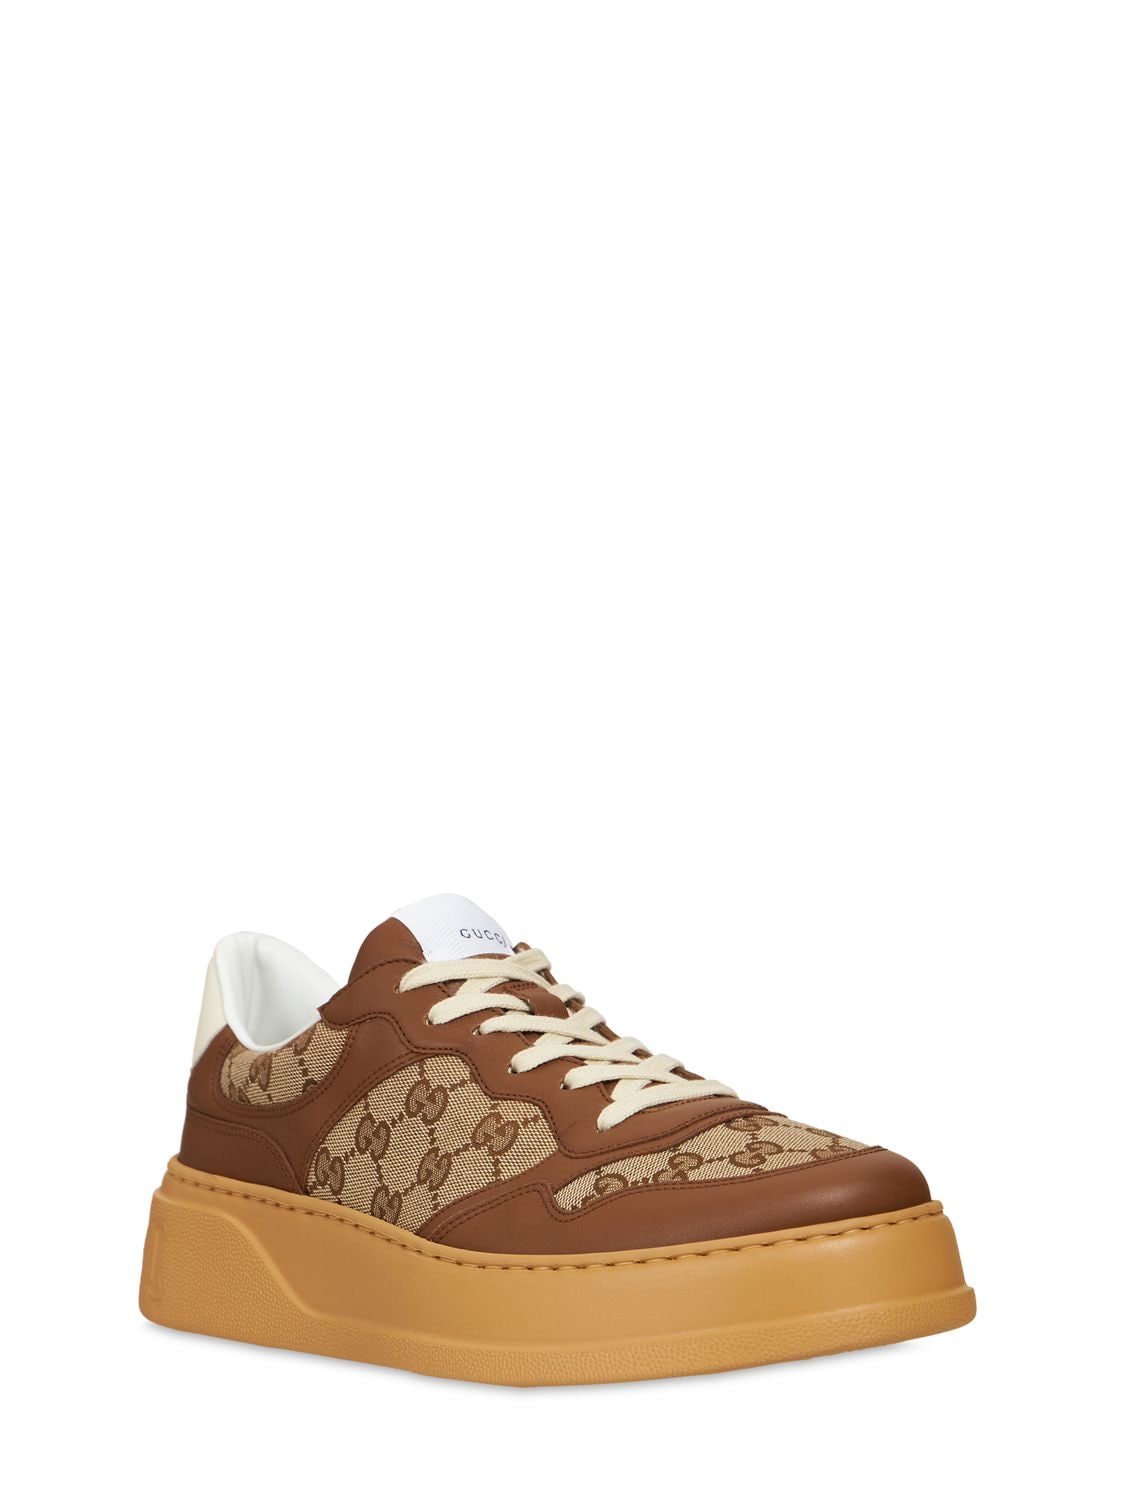 Shop Gucci Gg Canvas & Leather Sneakers In Brown,beige